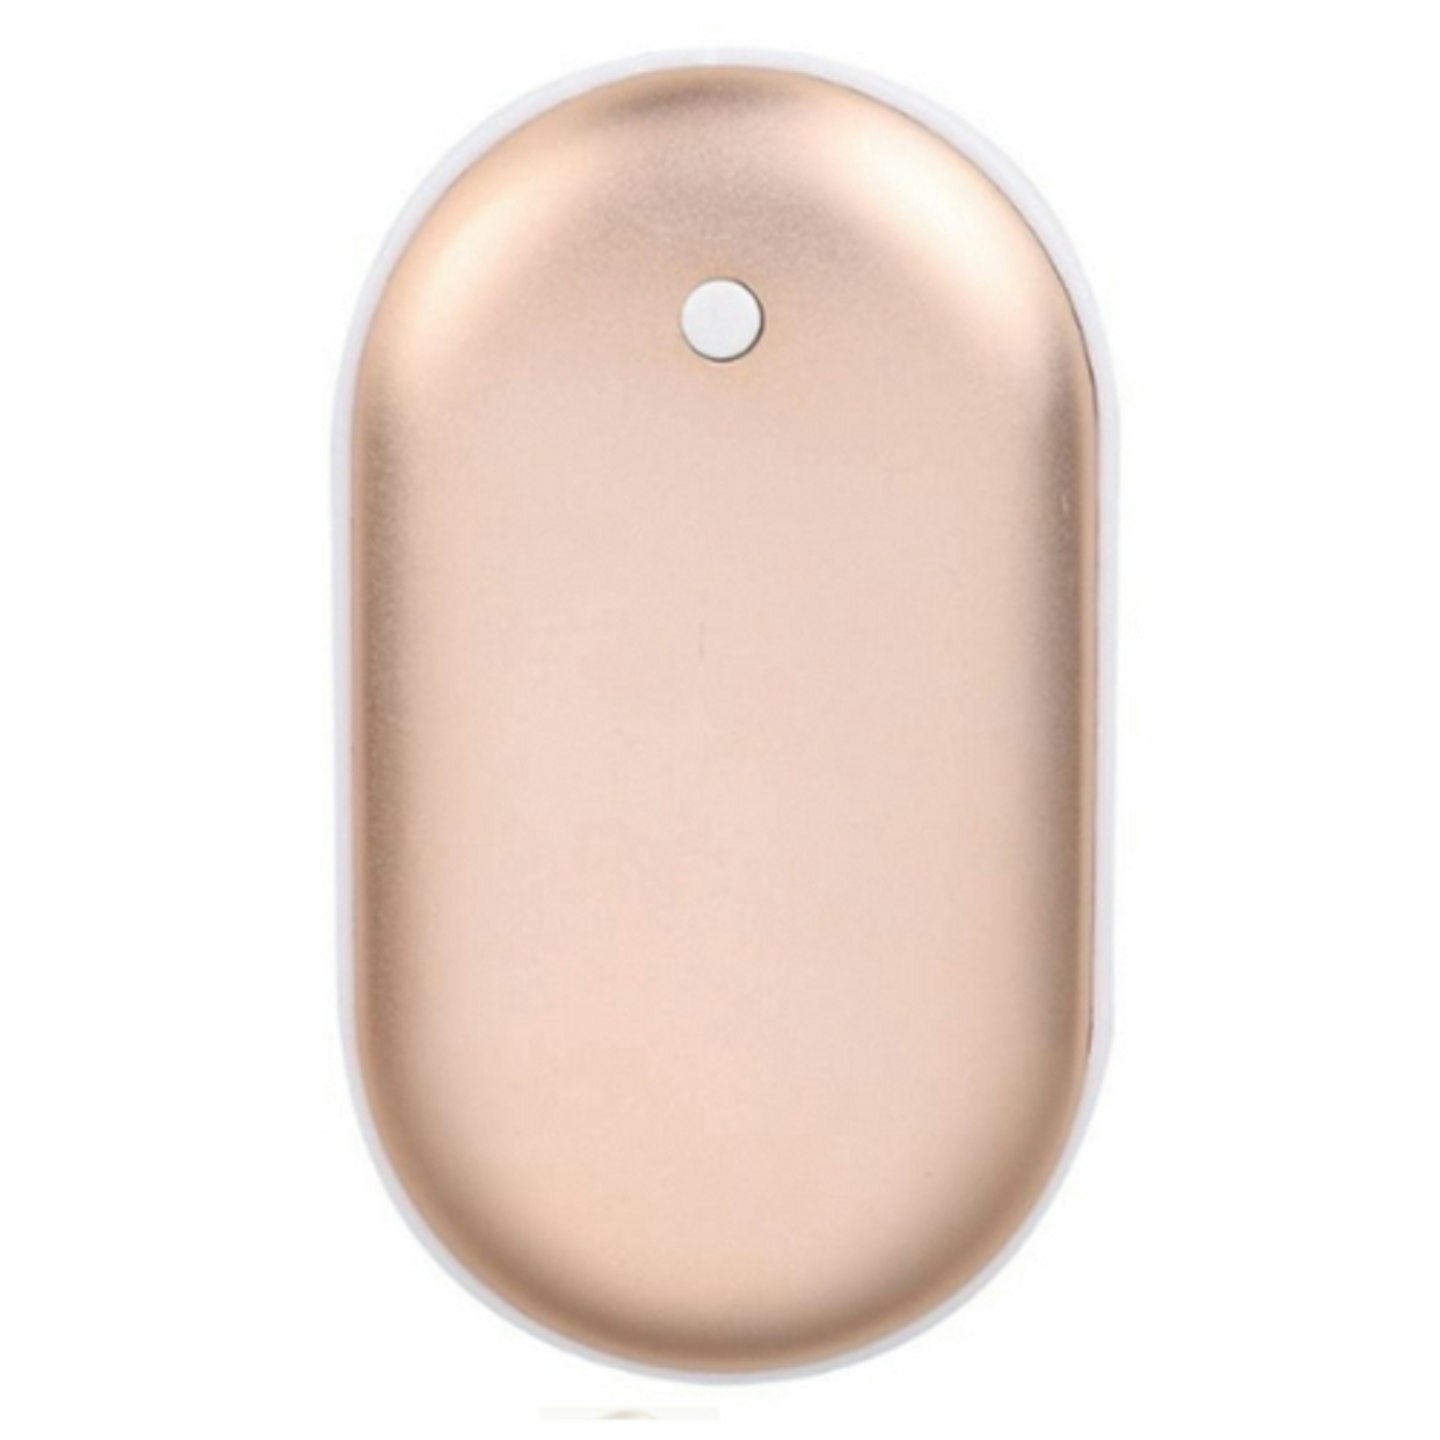 2-in-1 USB Rechargeable Hand Warmer Power Bank - Gold